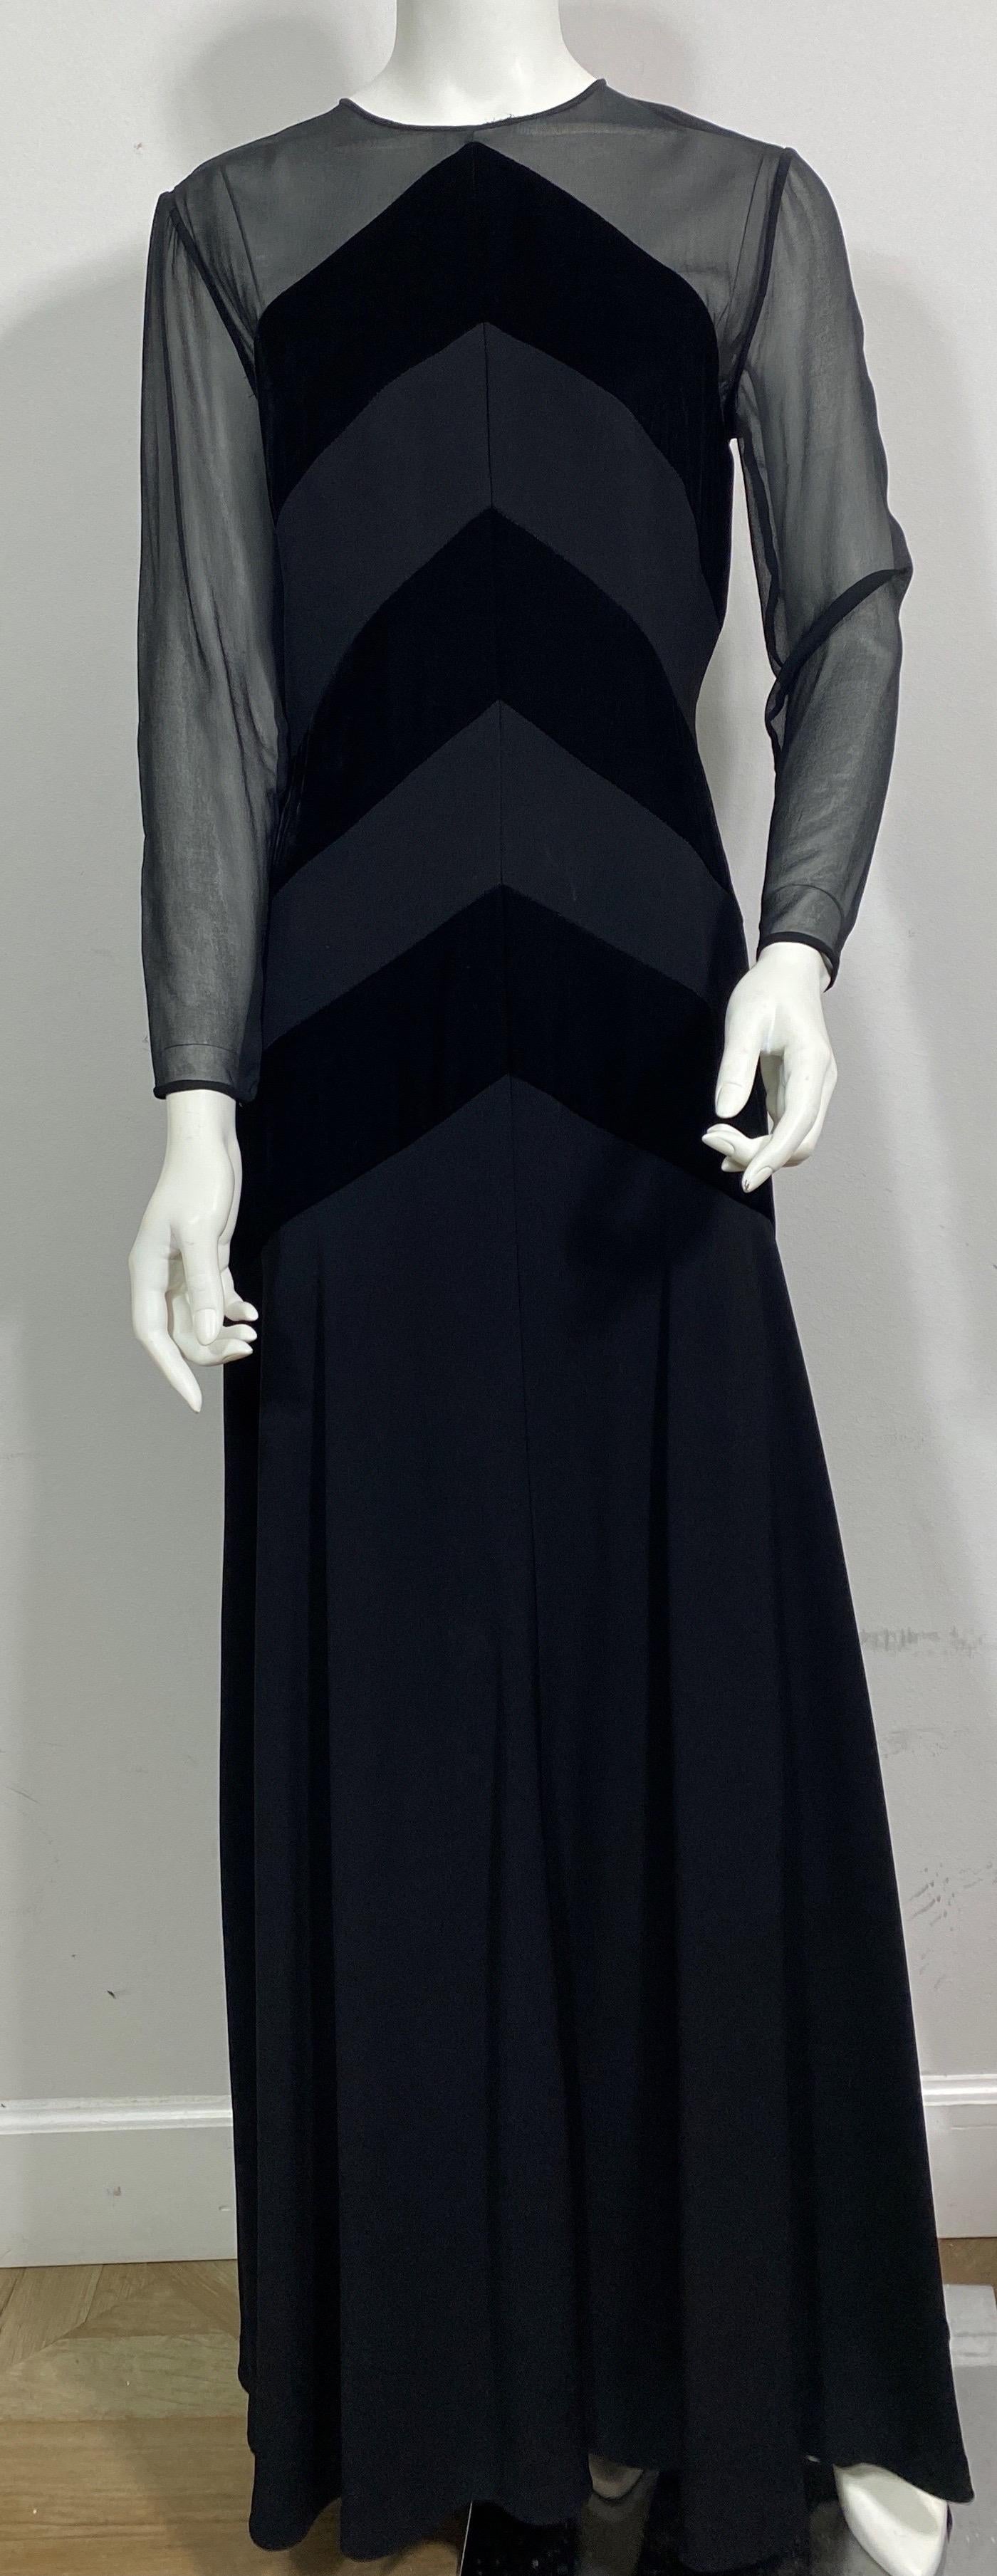 Bellville Sassoon 1990’s Black Long Sleeve Gown - Size 8  This 1990’s gown is made of a poly blend fabric but gives the appearance of silk, velvet and crepe. The gown is fitted to the hip area and then does a gradual flare to a flow skirt towards